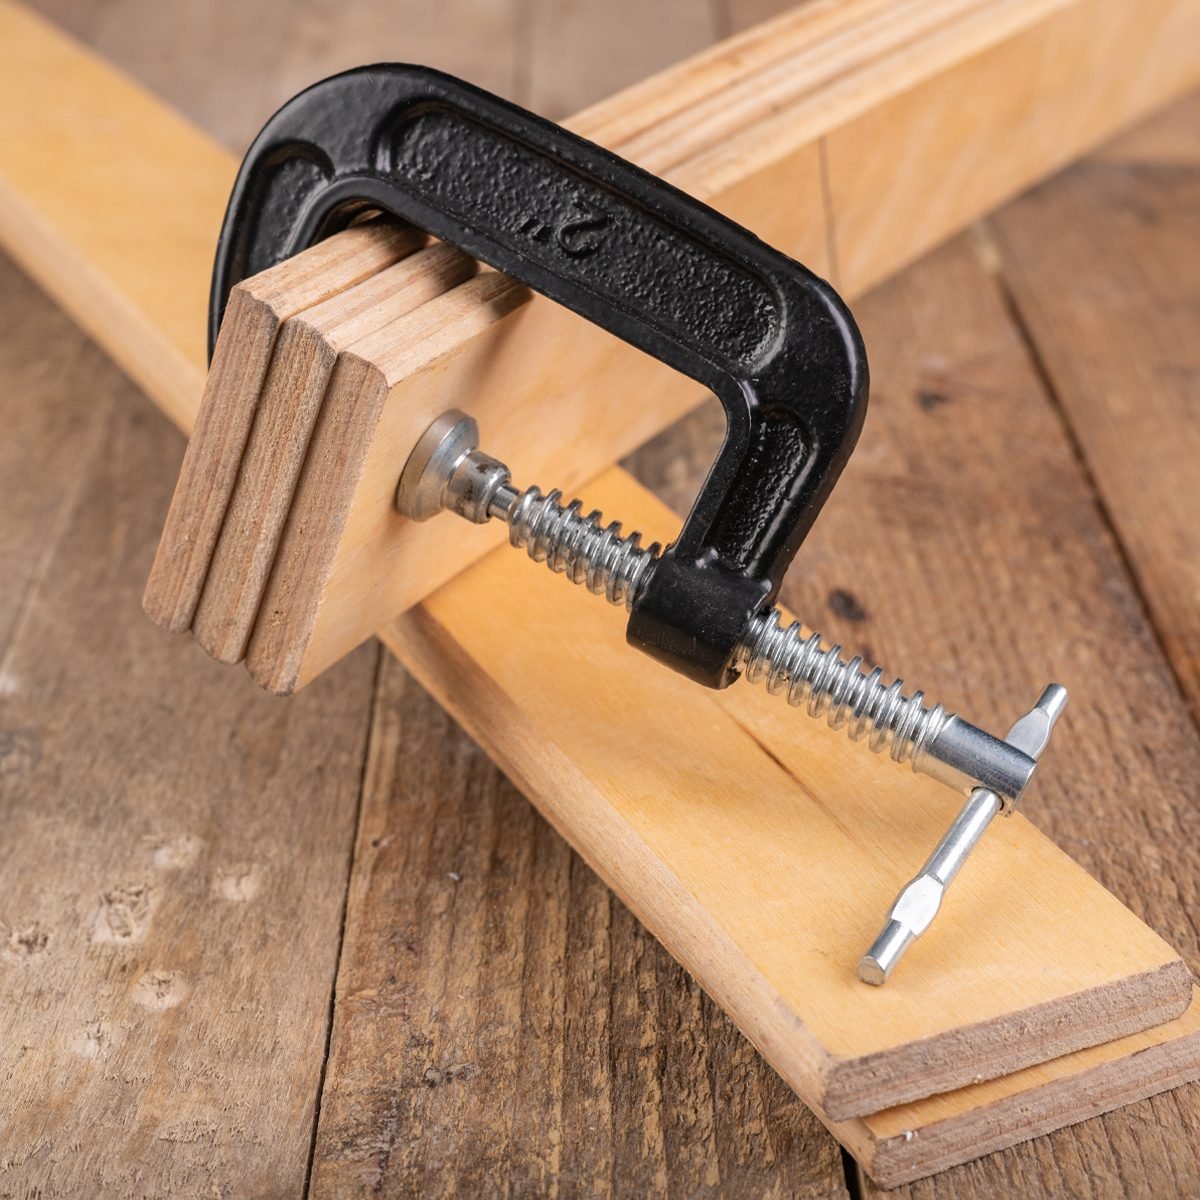 9 Types of Clamps and What They're Used For